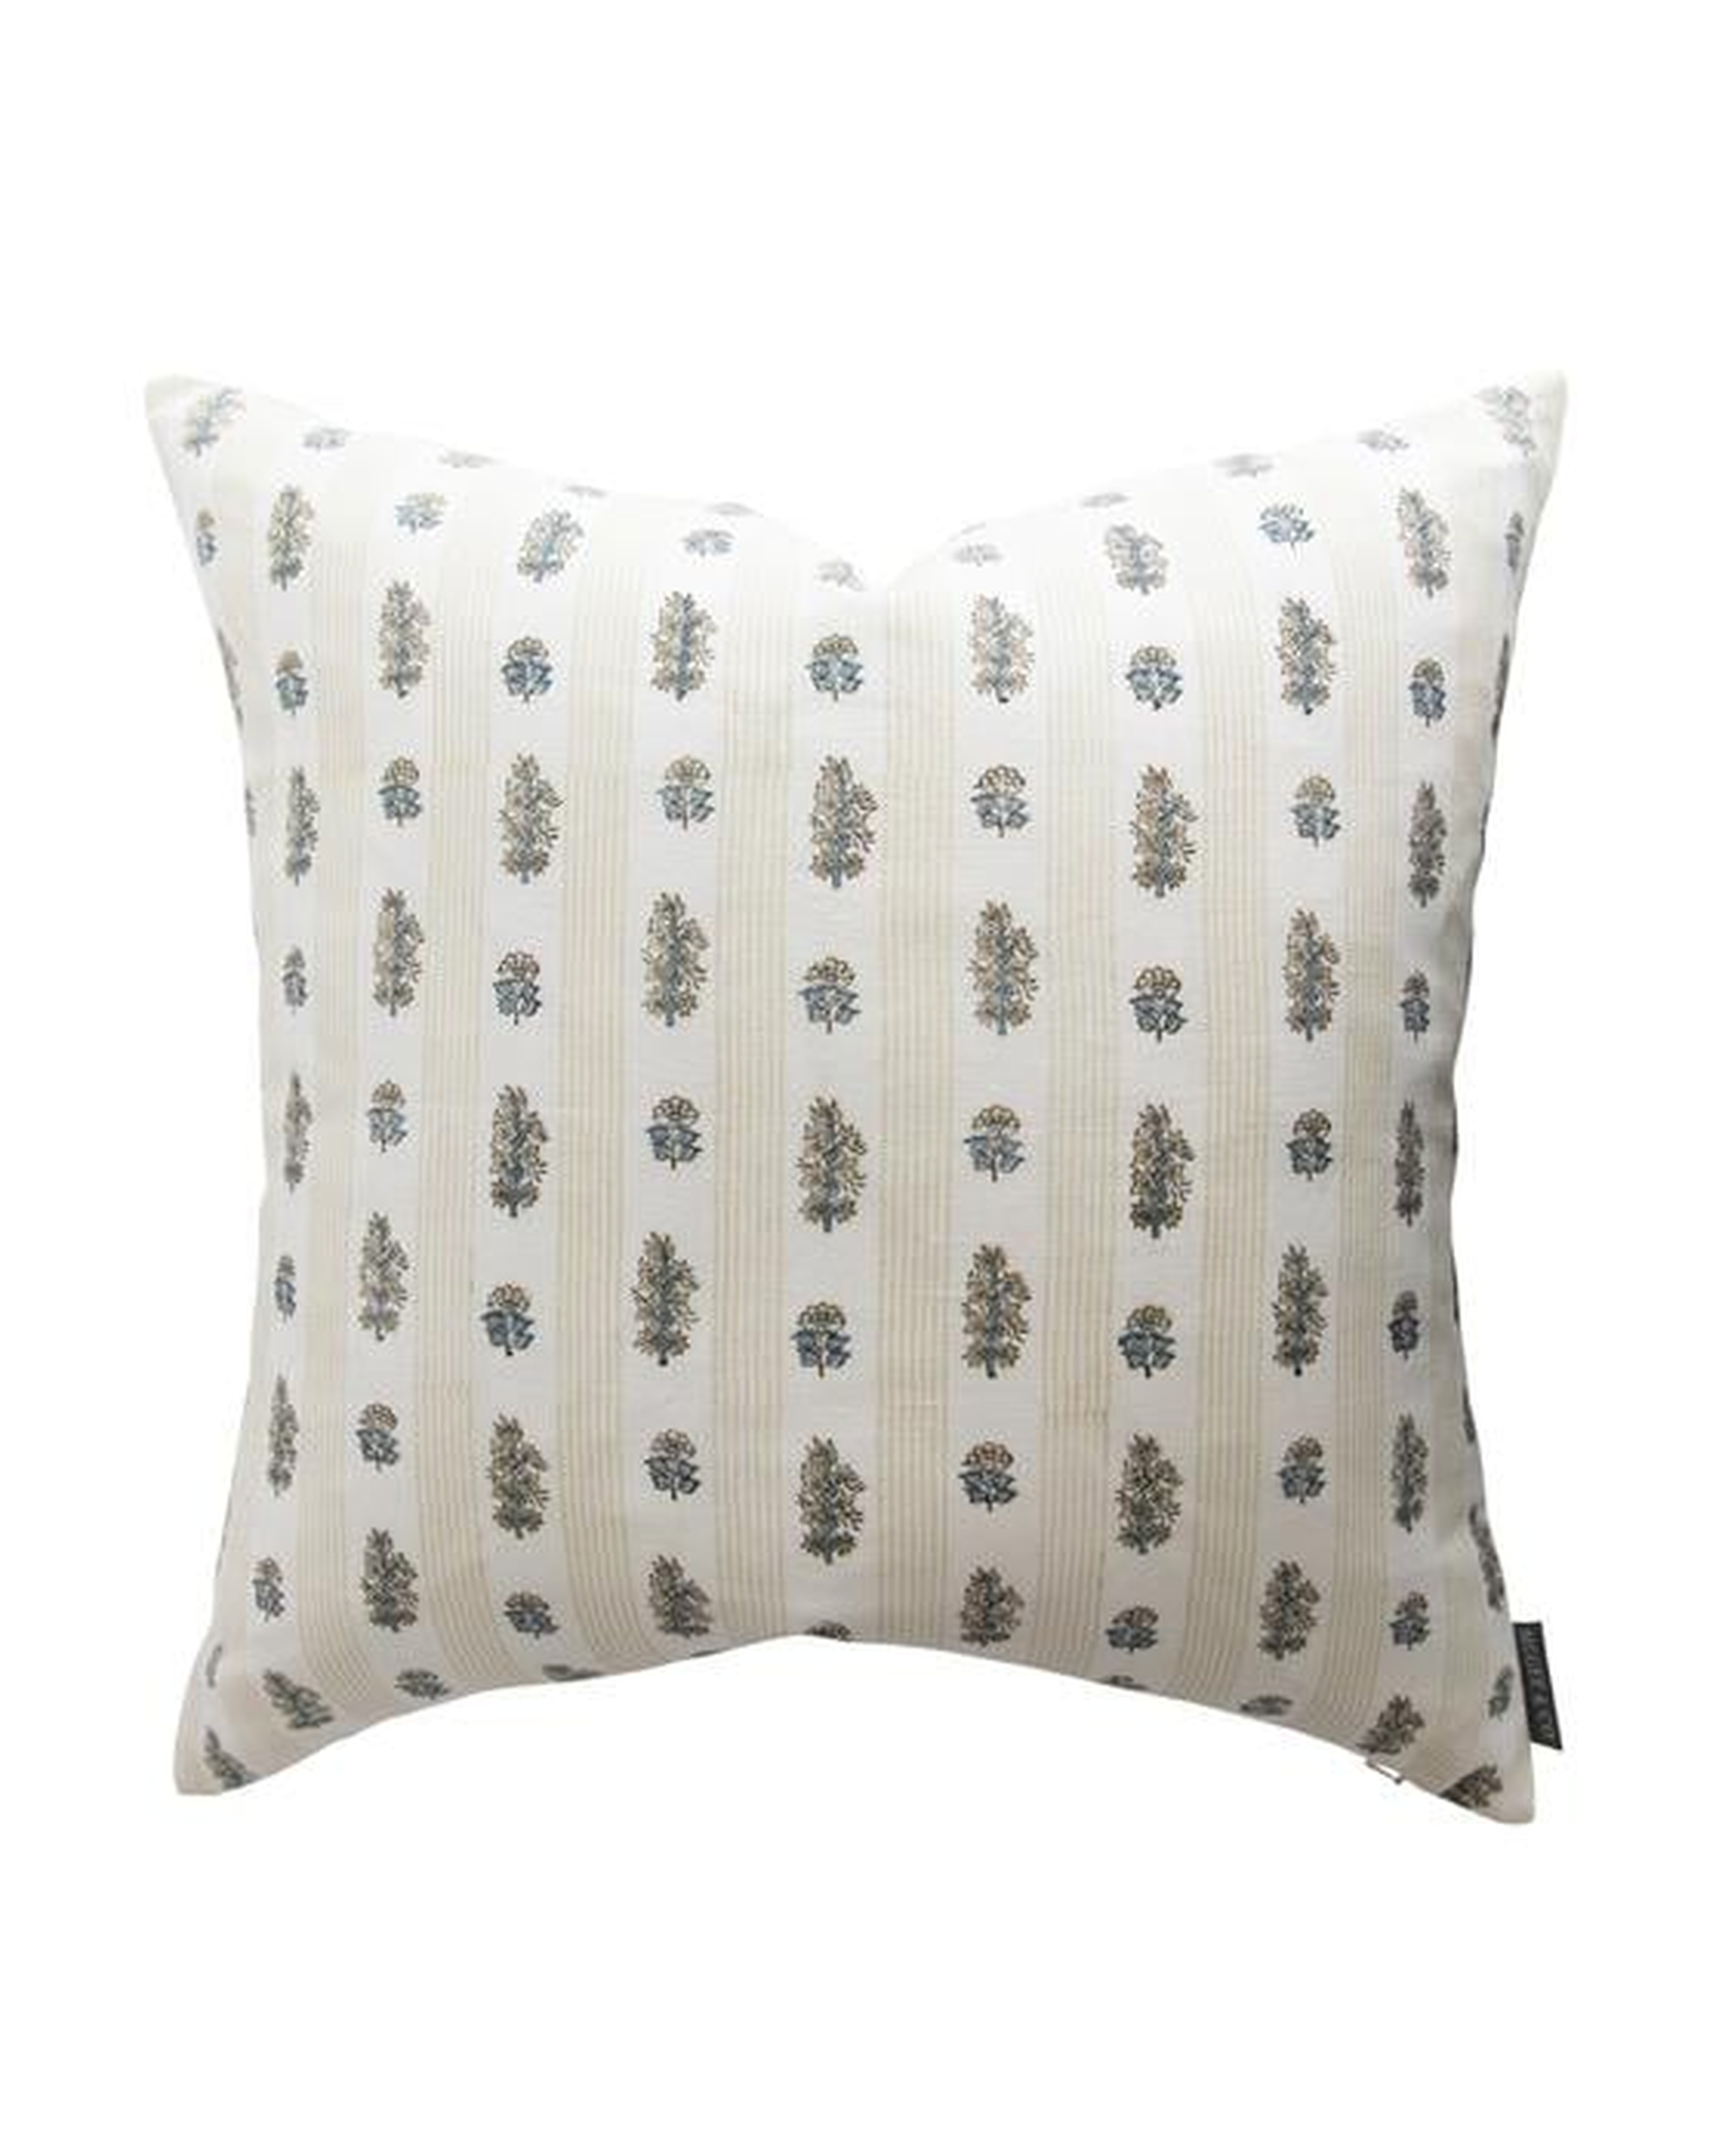 Roselle Patterned Pillow Cover - McGee & Co.